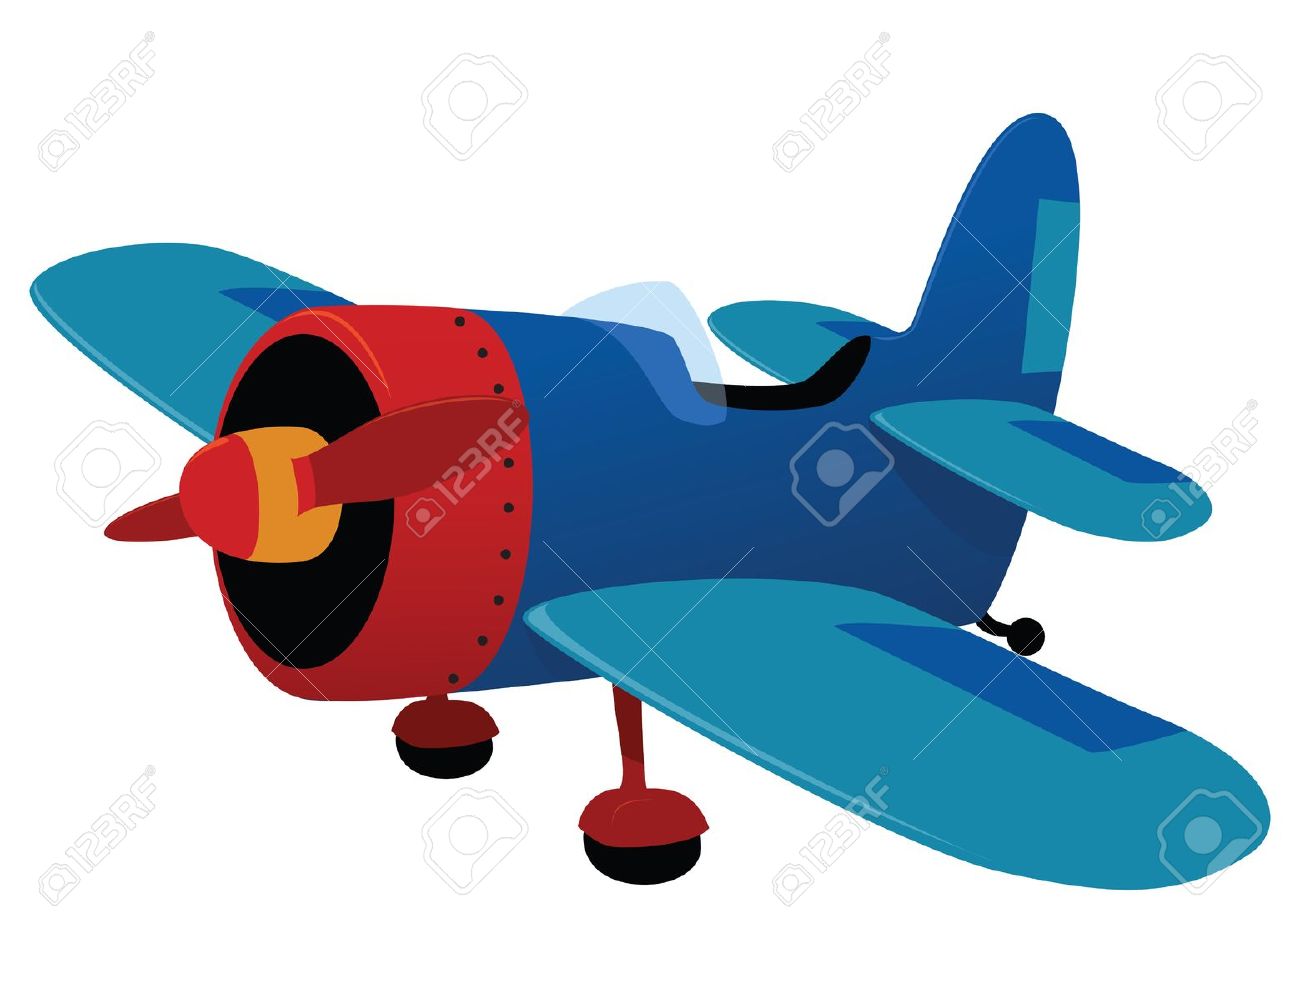 airplane toy clipart - photo #35